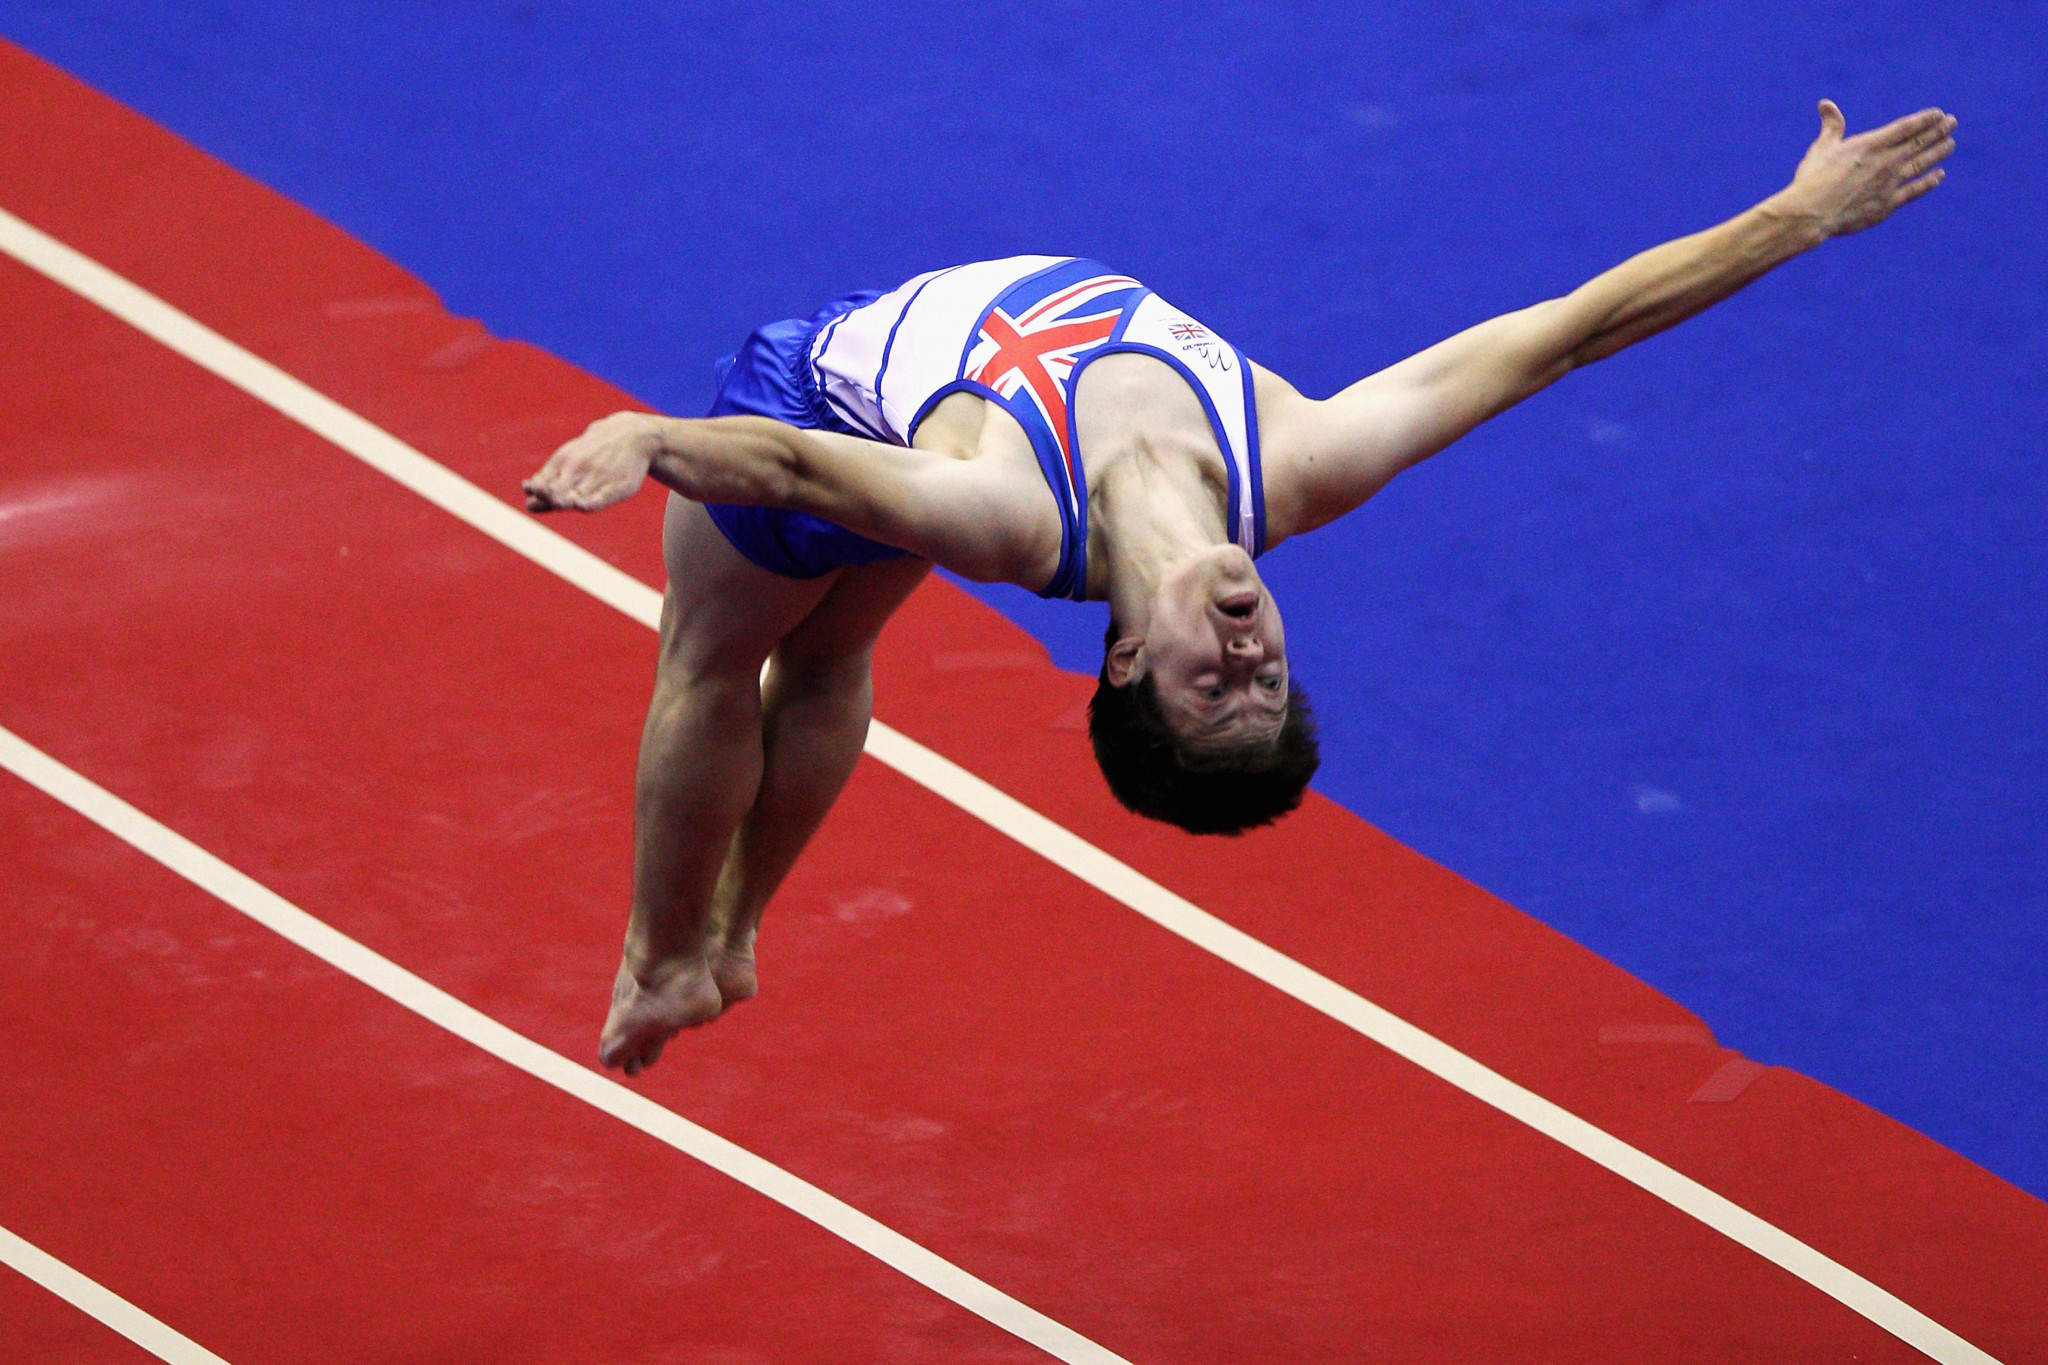 Kristof Willerton helped Britain to win the men's tumbling team event at the European Championships ©Getty Images